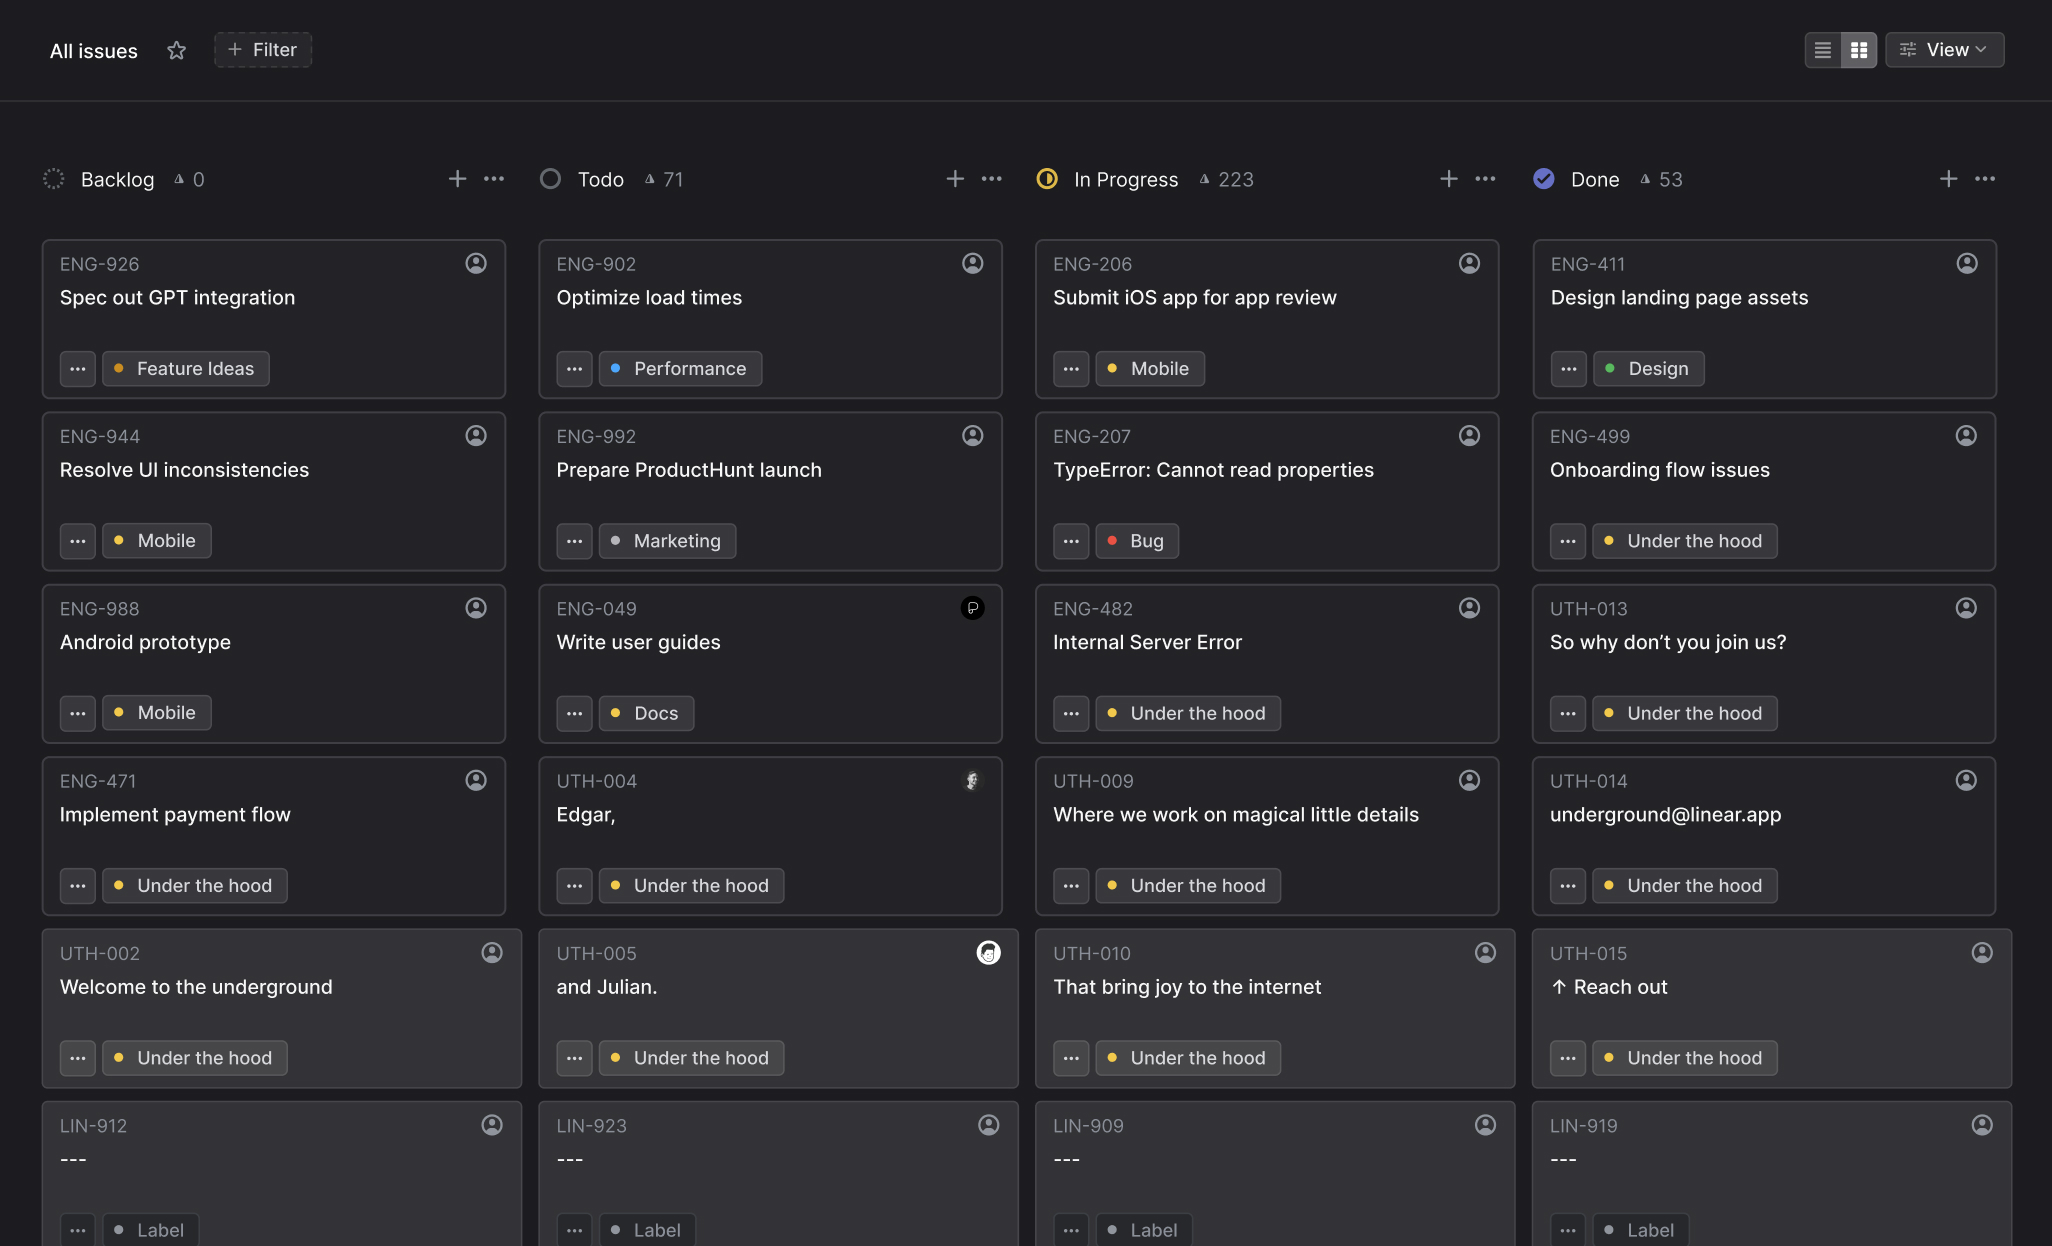 A board view showing all team issues in Linear. The issues include "Optimize load times", "Prepare ProductHunt launch", "Design landing page assets", and "Spec out GPT integration".